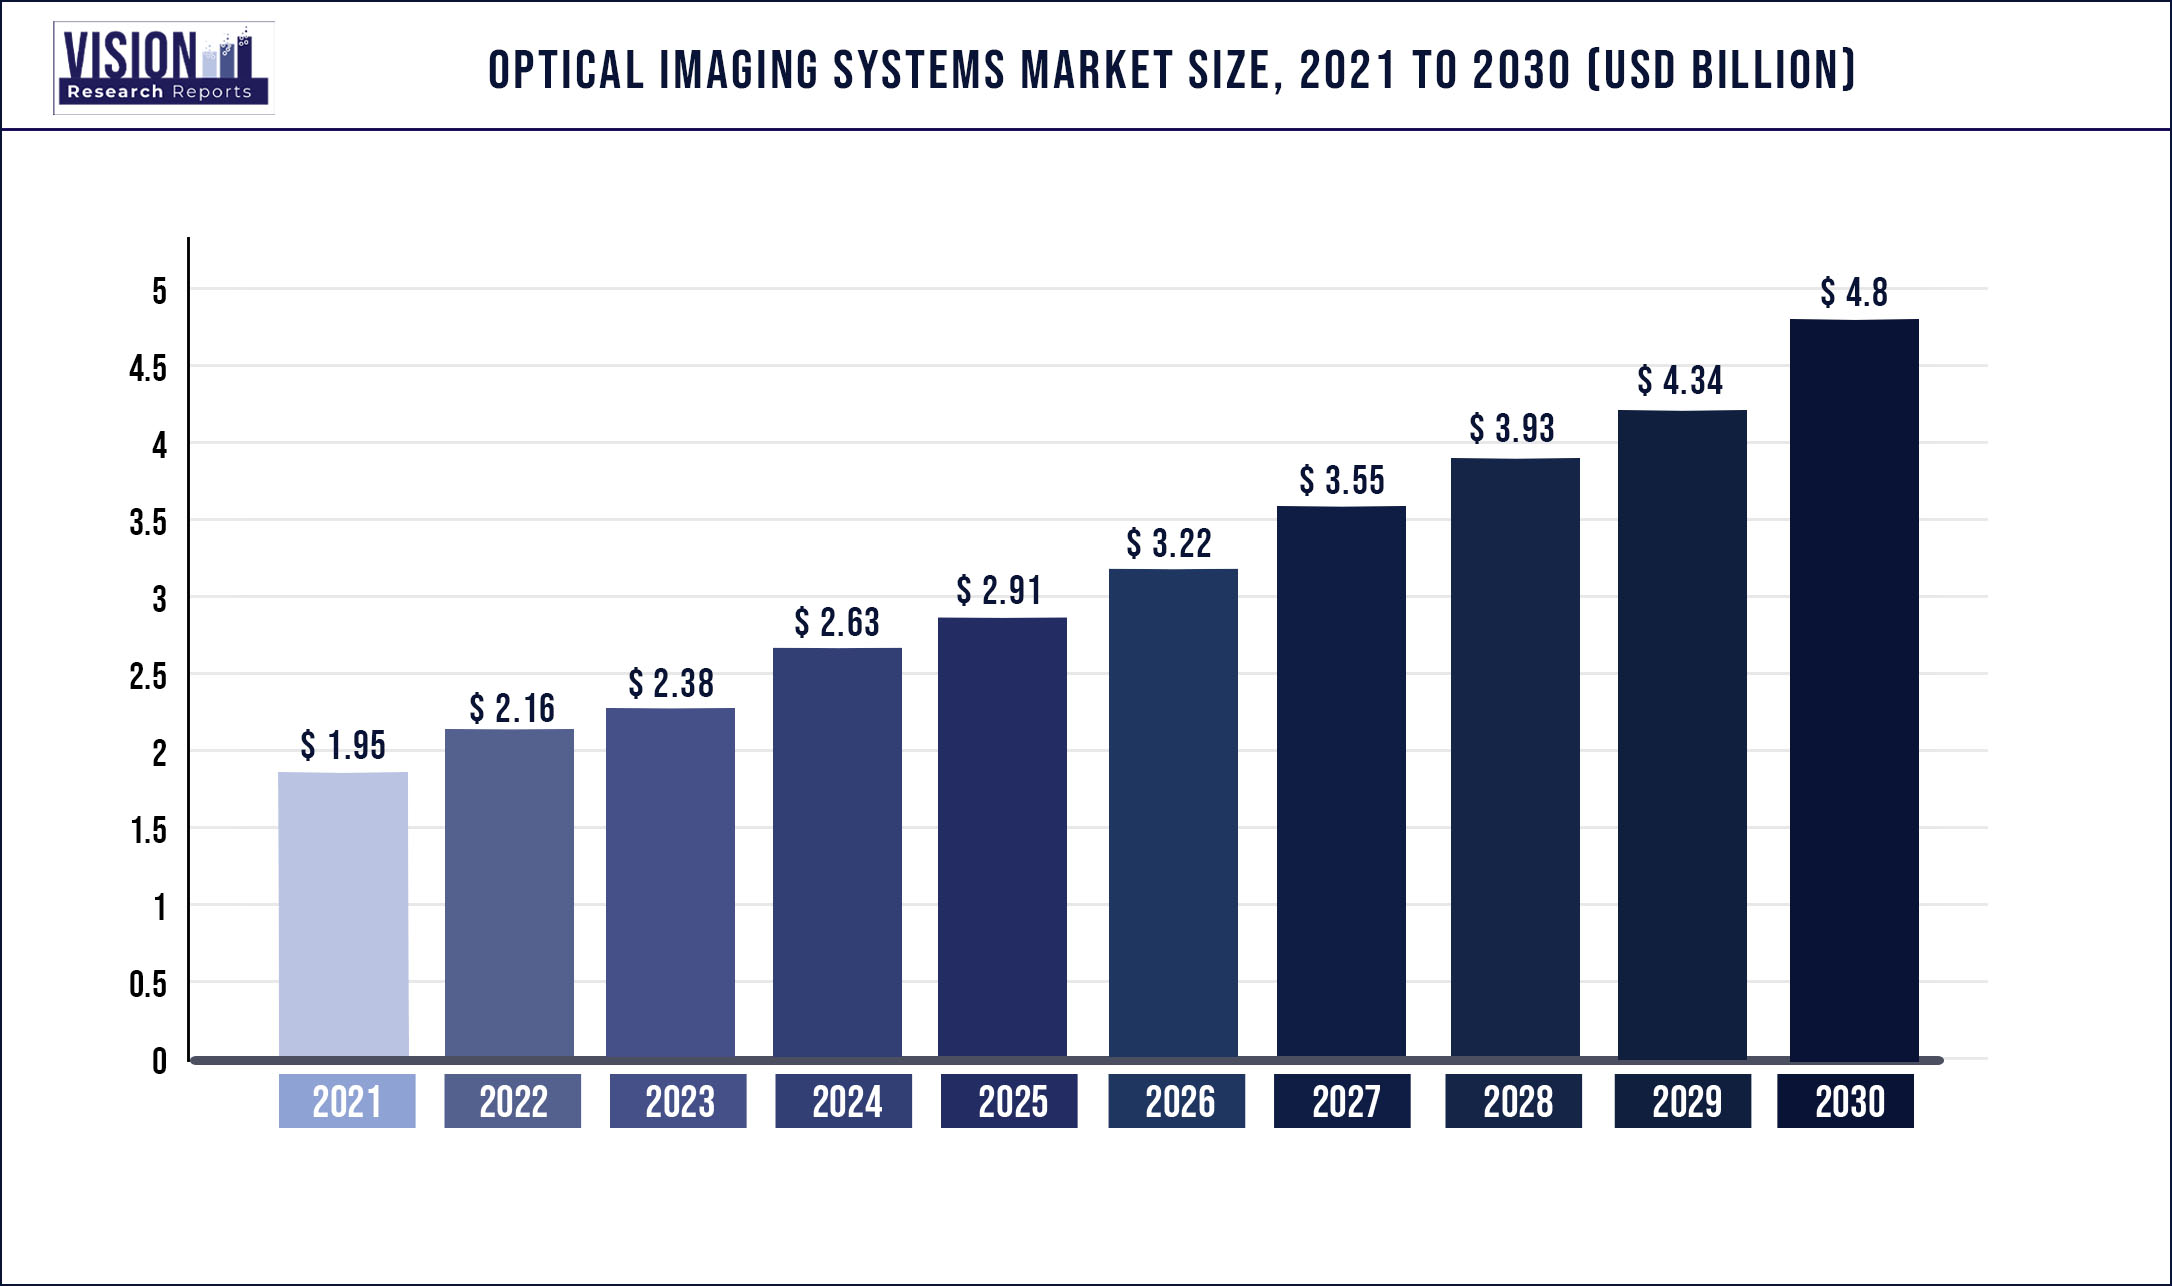 Optical Imaging Systems Market Size 2021 to 2030